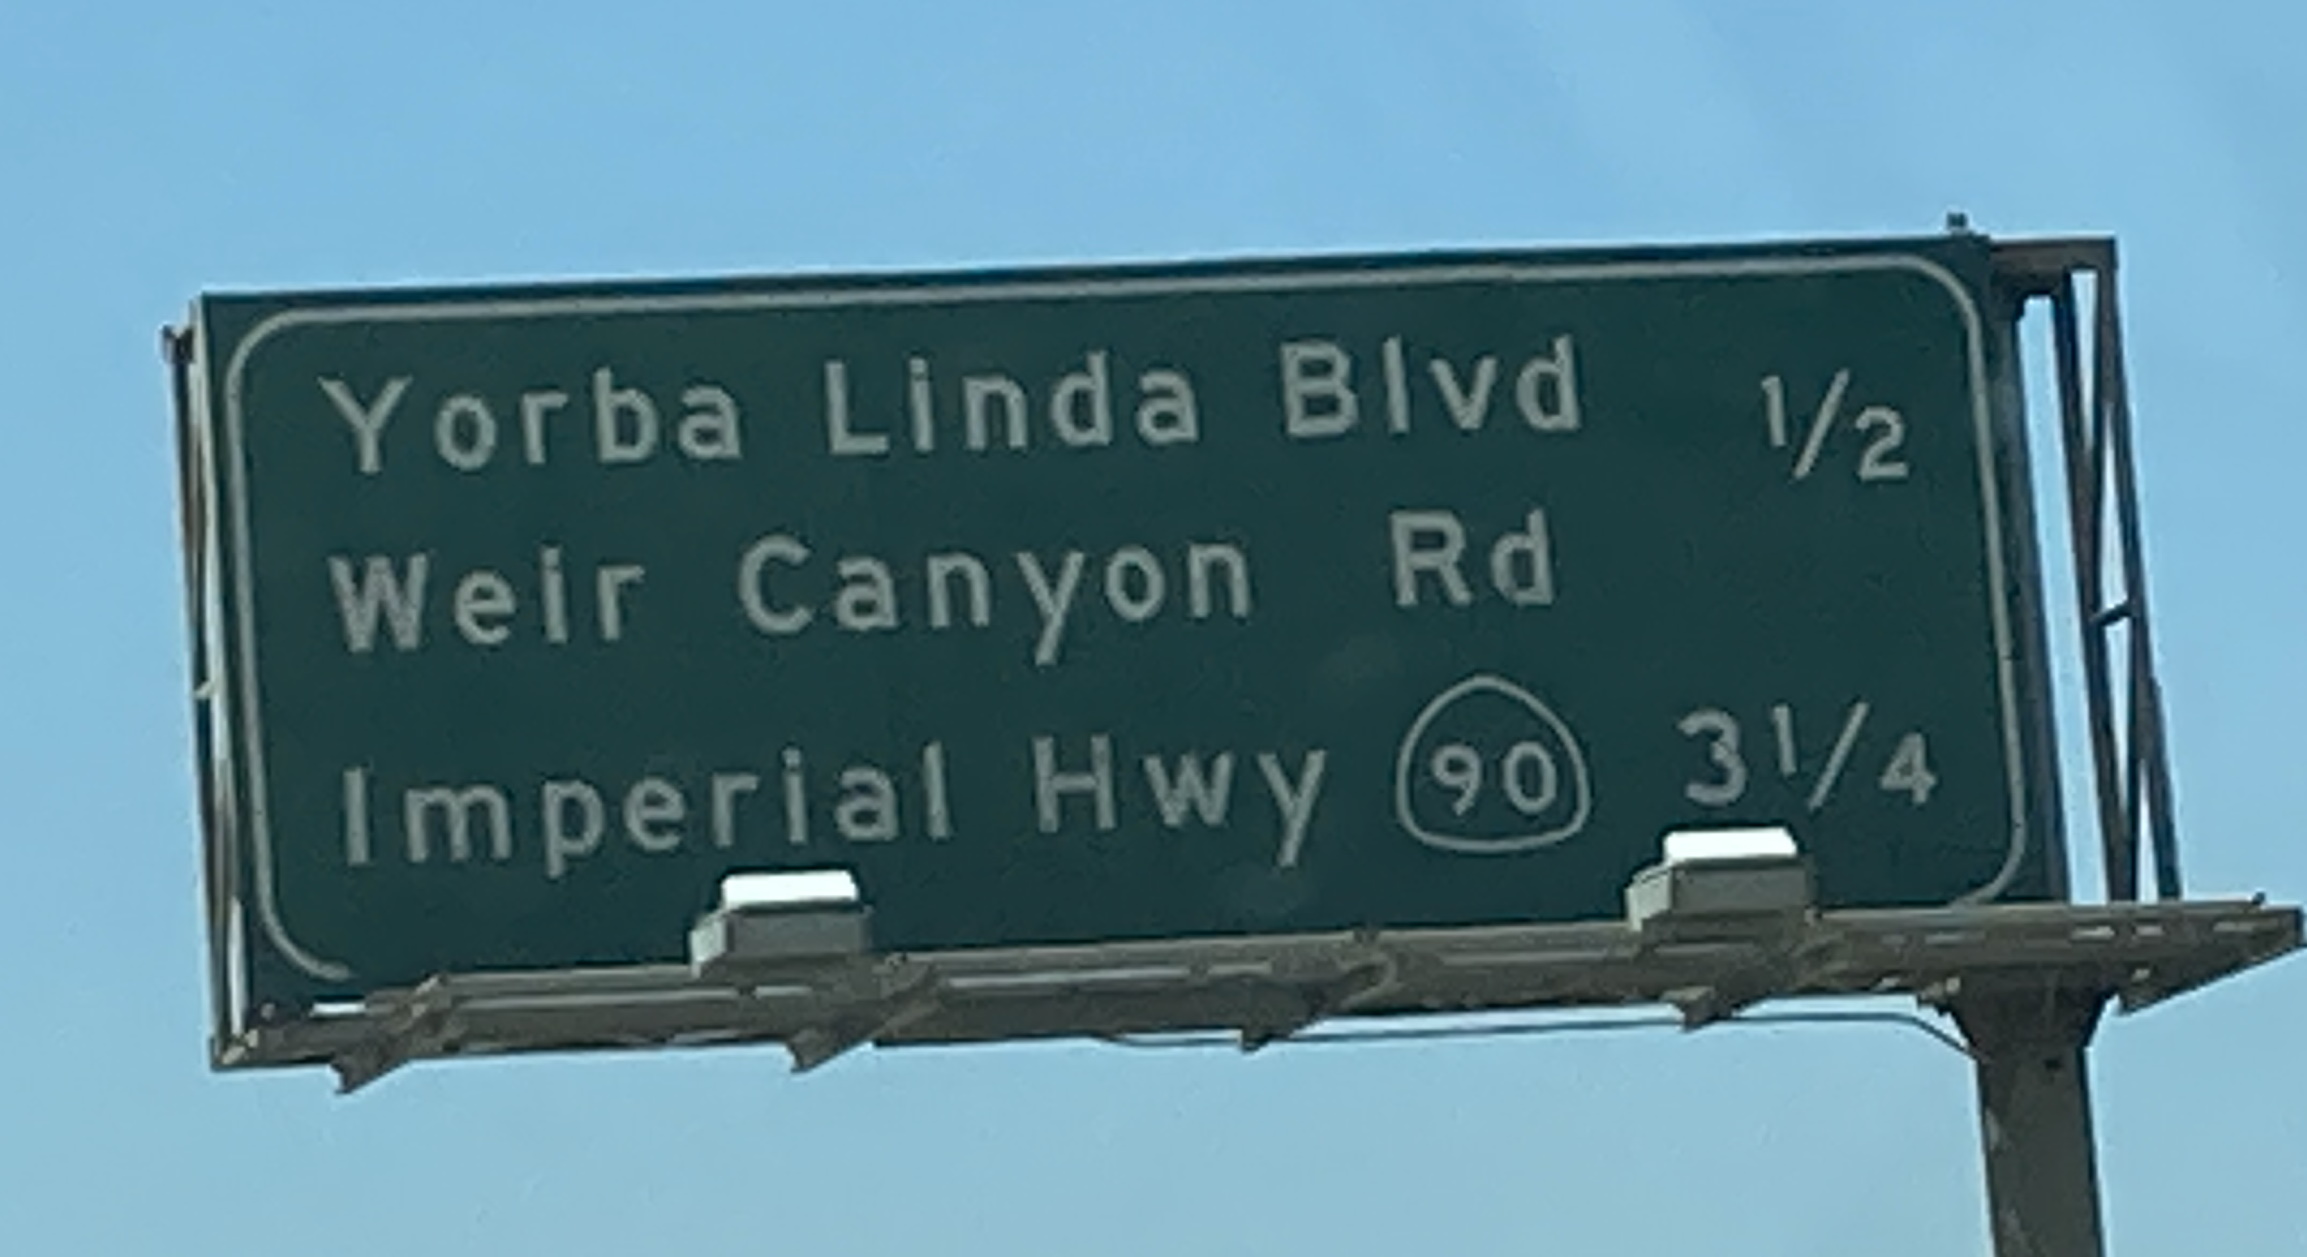 CA91W/E of Weir Canyon